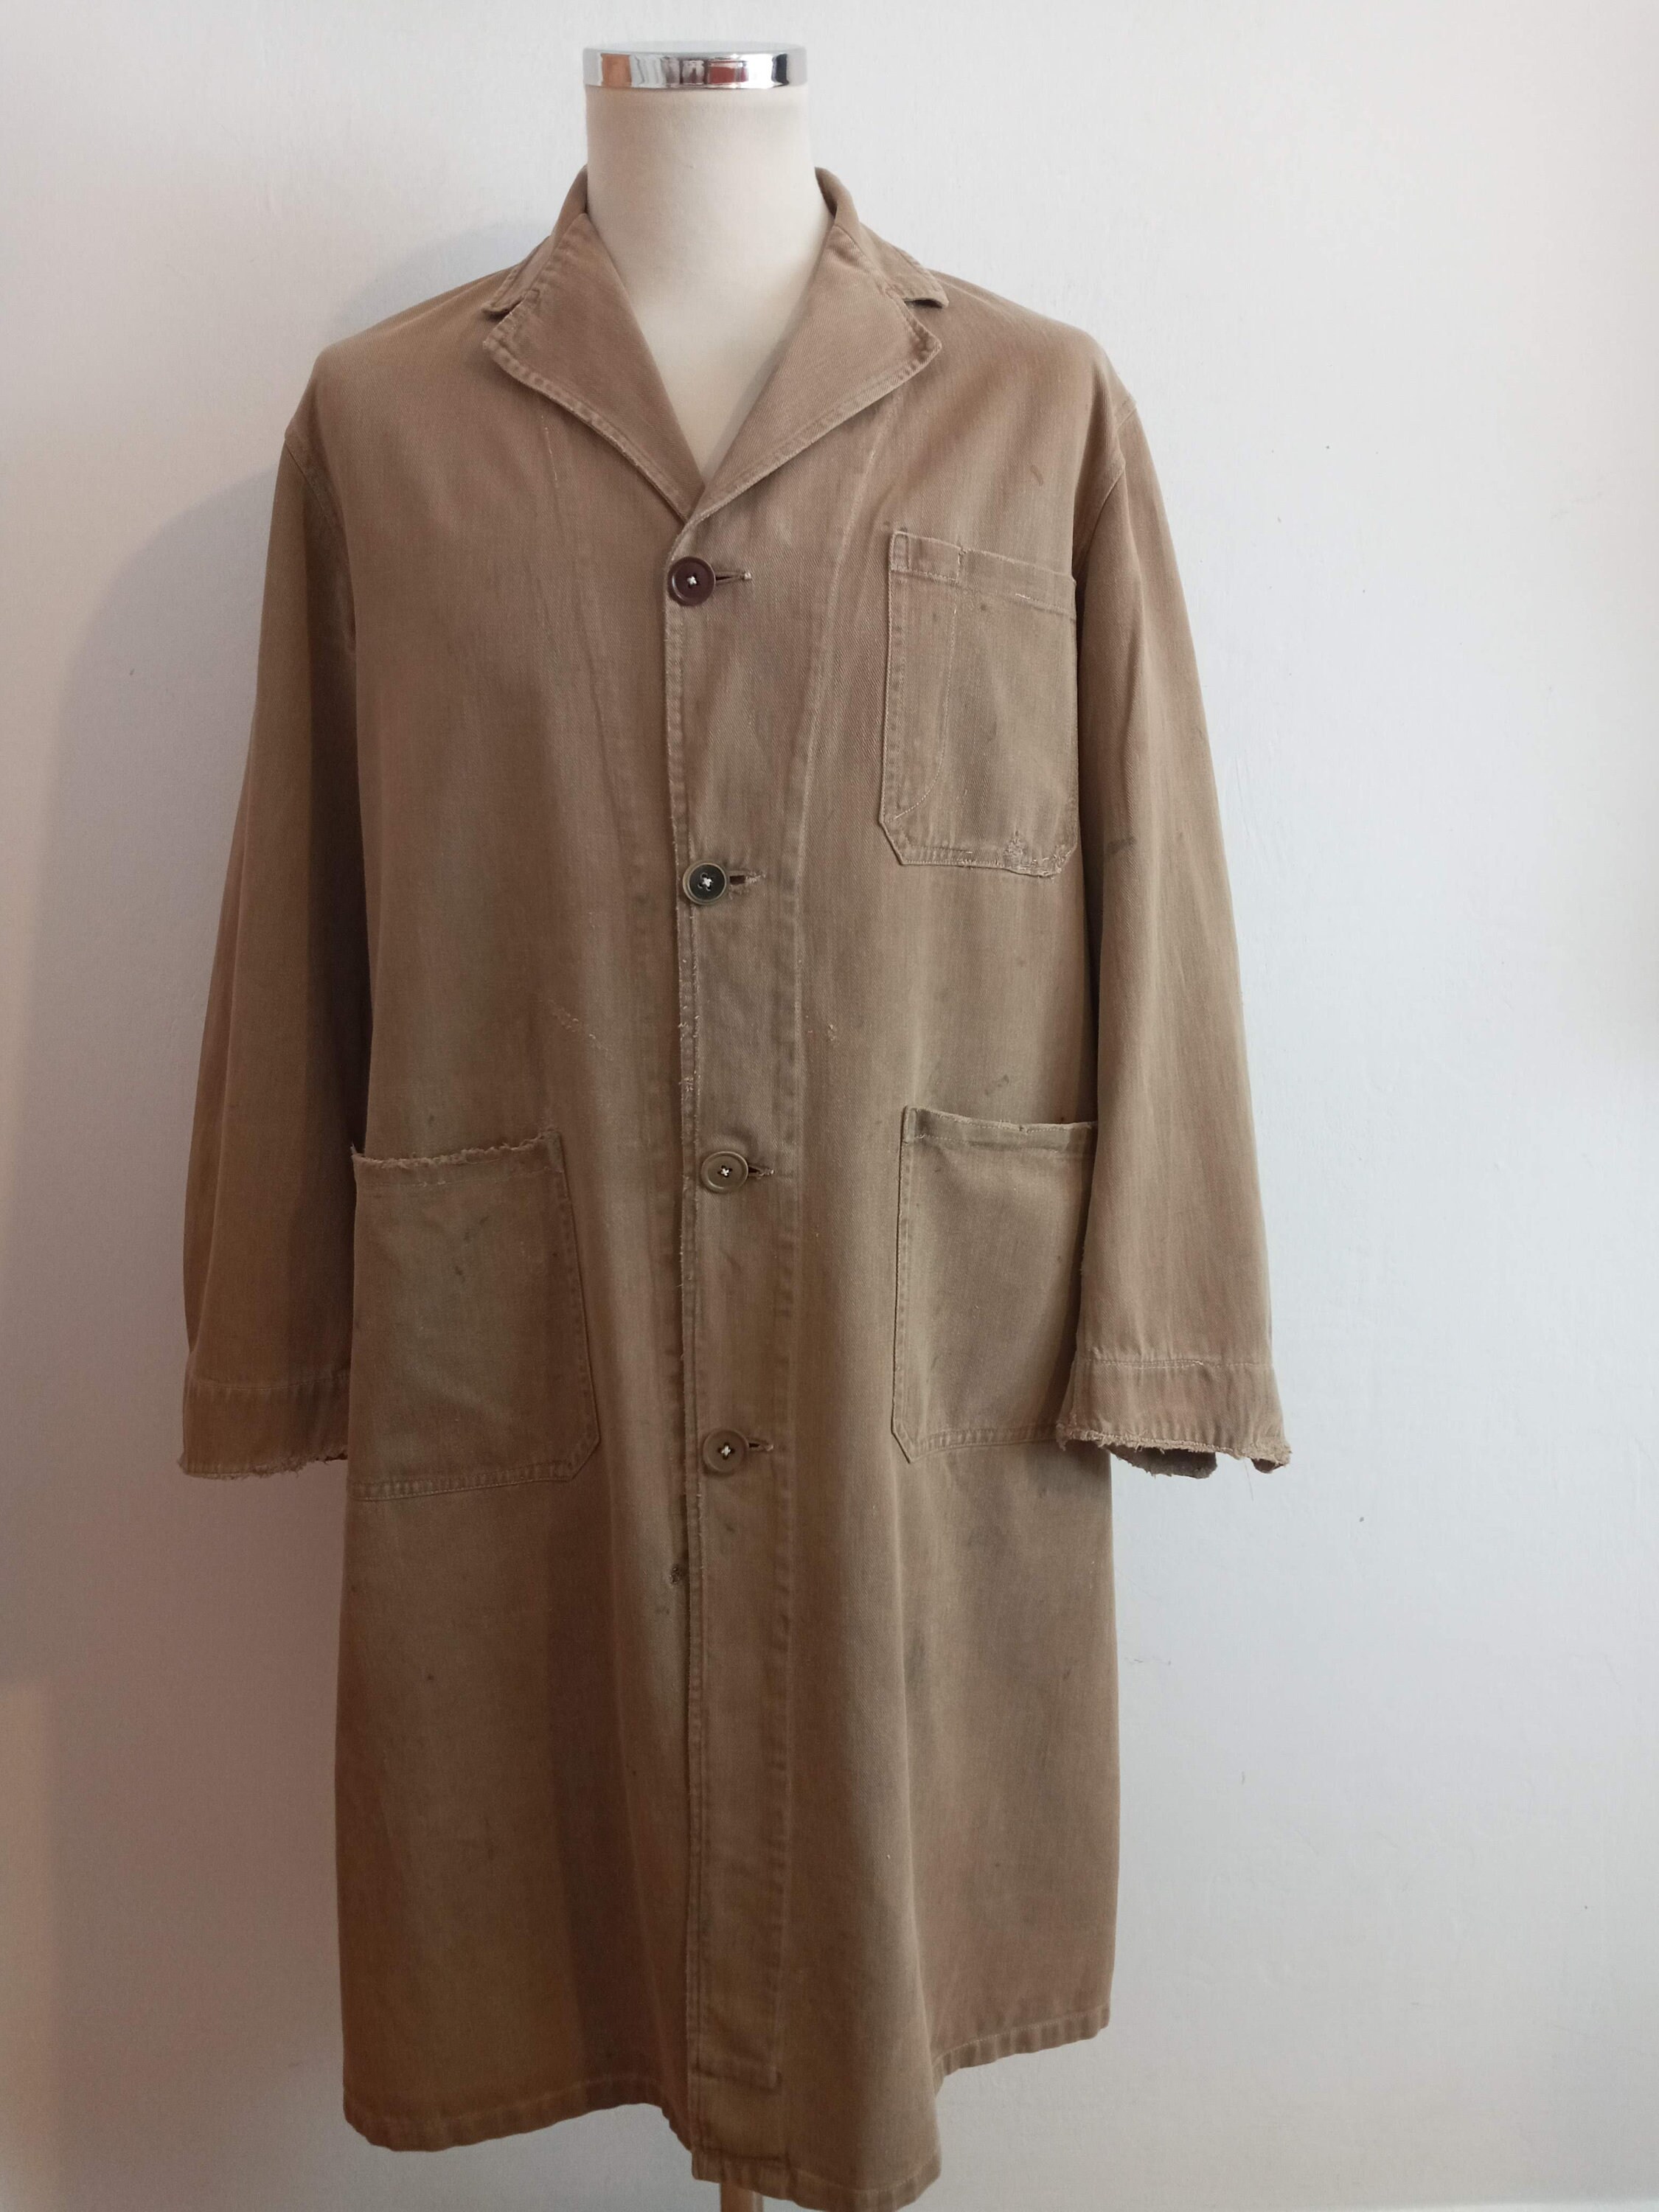 Vintage 1950s 50s British Chore Coat Workwear Duster Work Overall